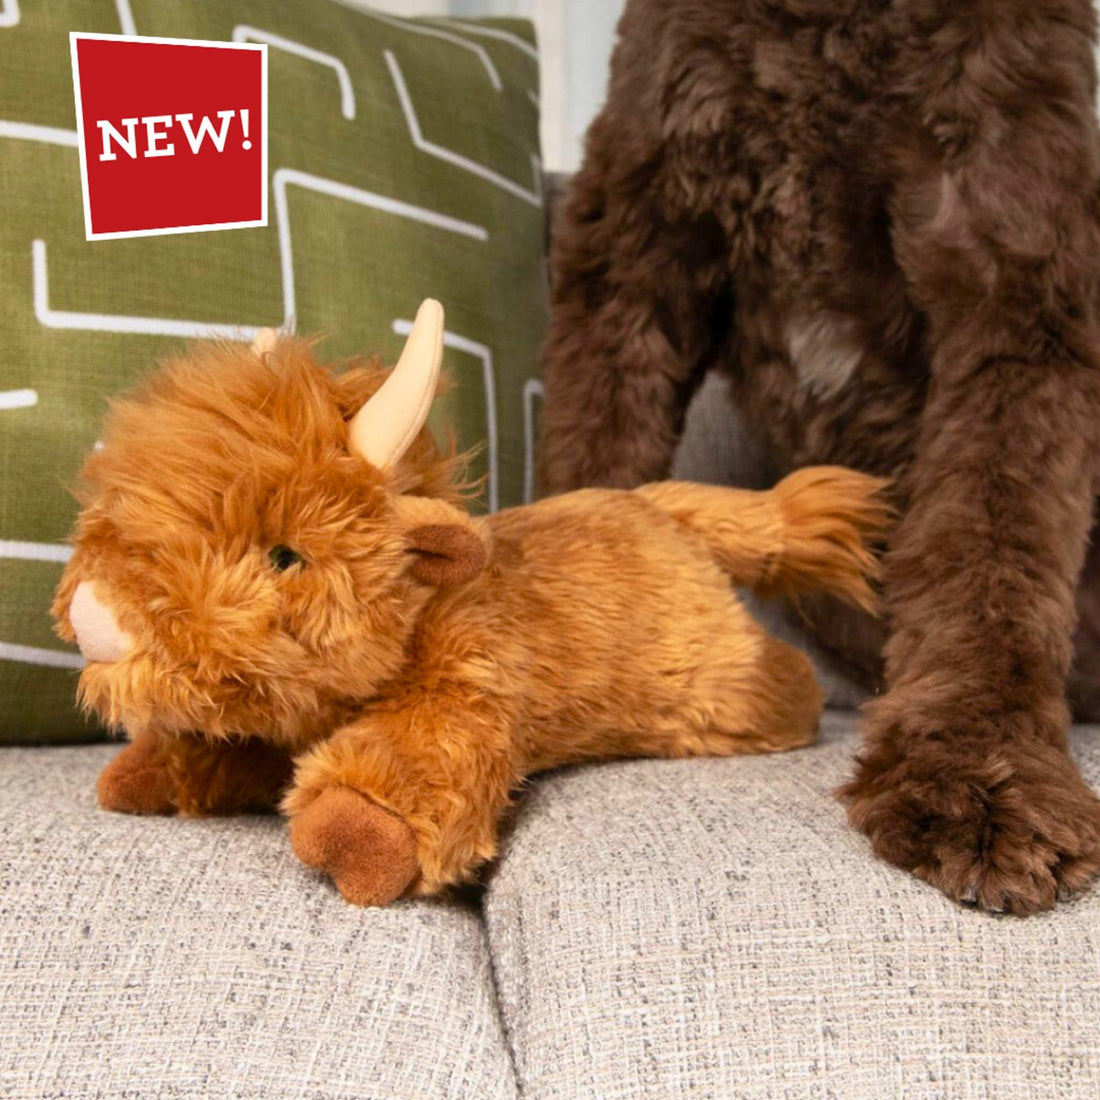 Shaggy Highland Cow (Coming soon!) - Woof Living